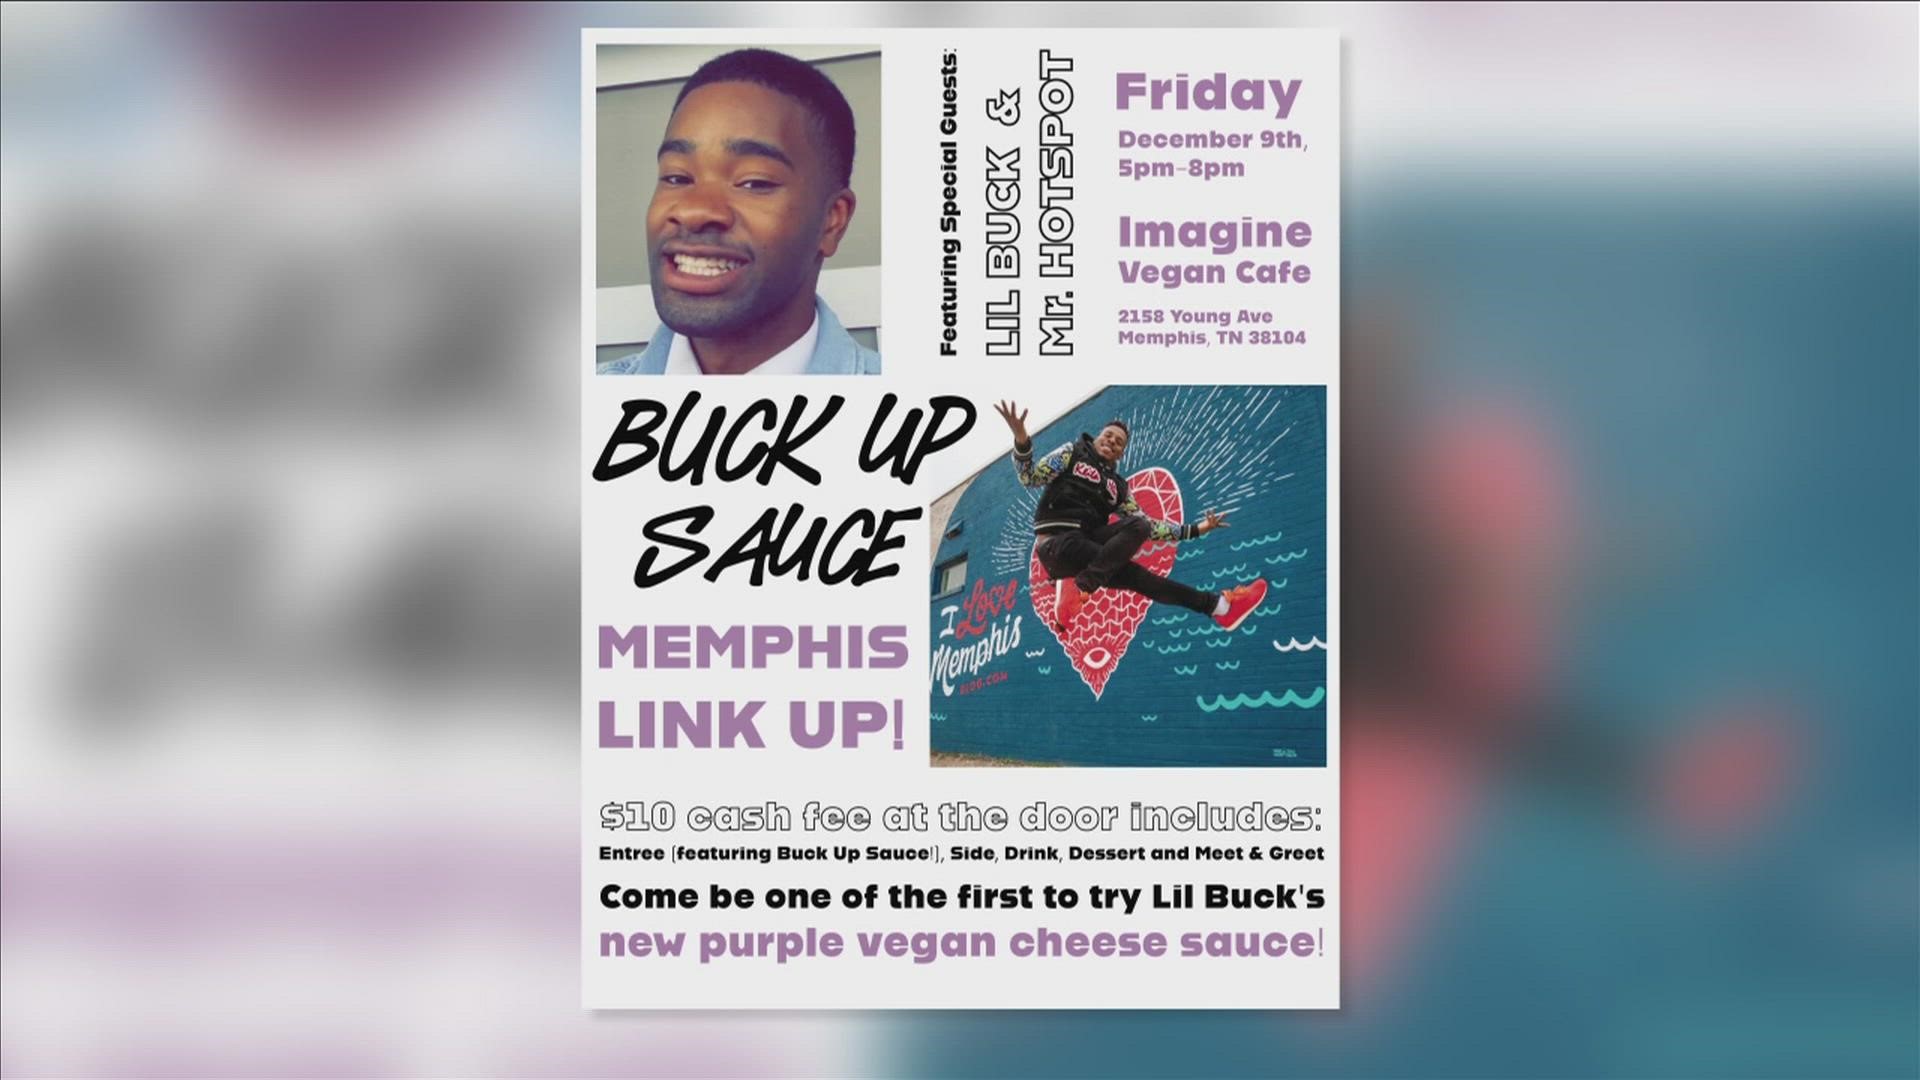 Memphis Jooker Lil' Buck partnered with Imagine Vegan Cafe to create a vegan cheese sauce. They will launch it an event Friday evening.